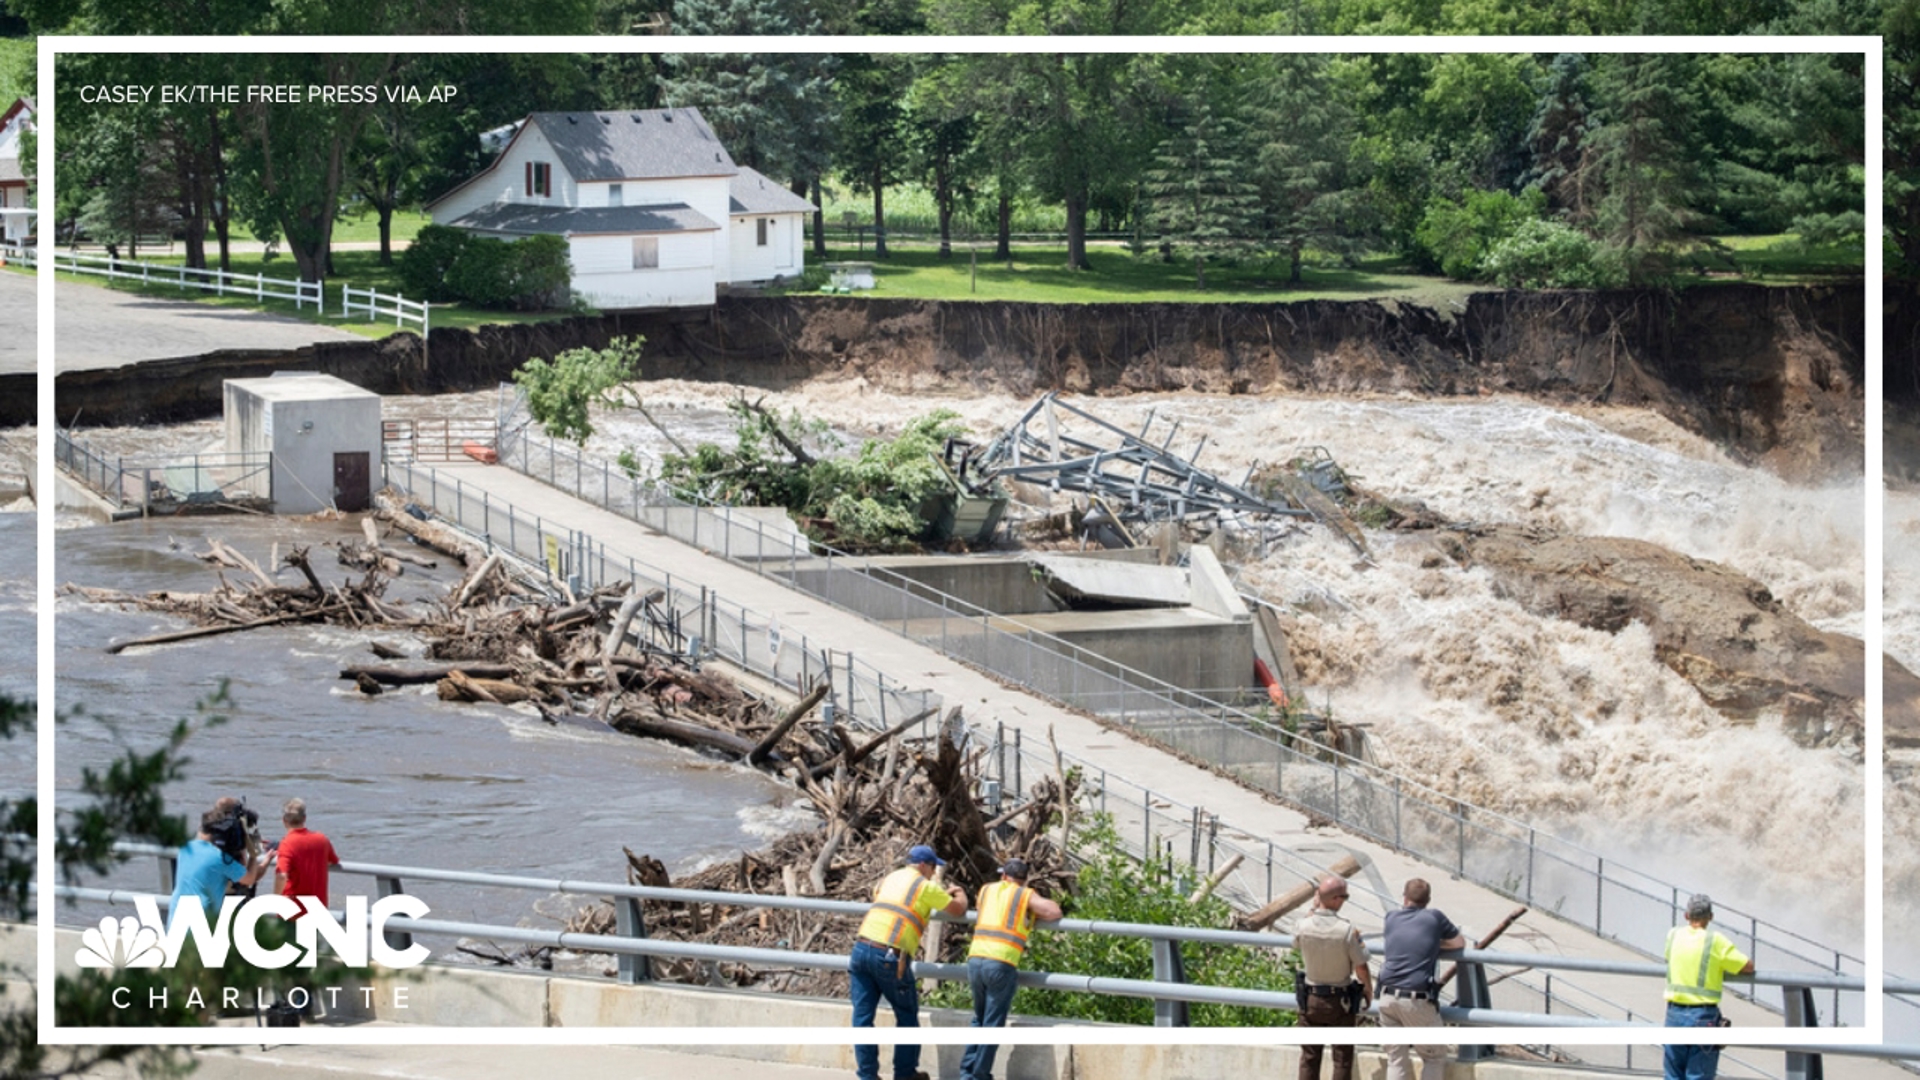 After days of heavy rain and more in the forecast, dams across the midwest region are at risk of what officials are calling imminent failure.